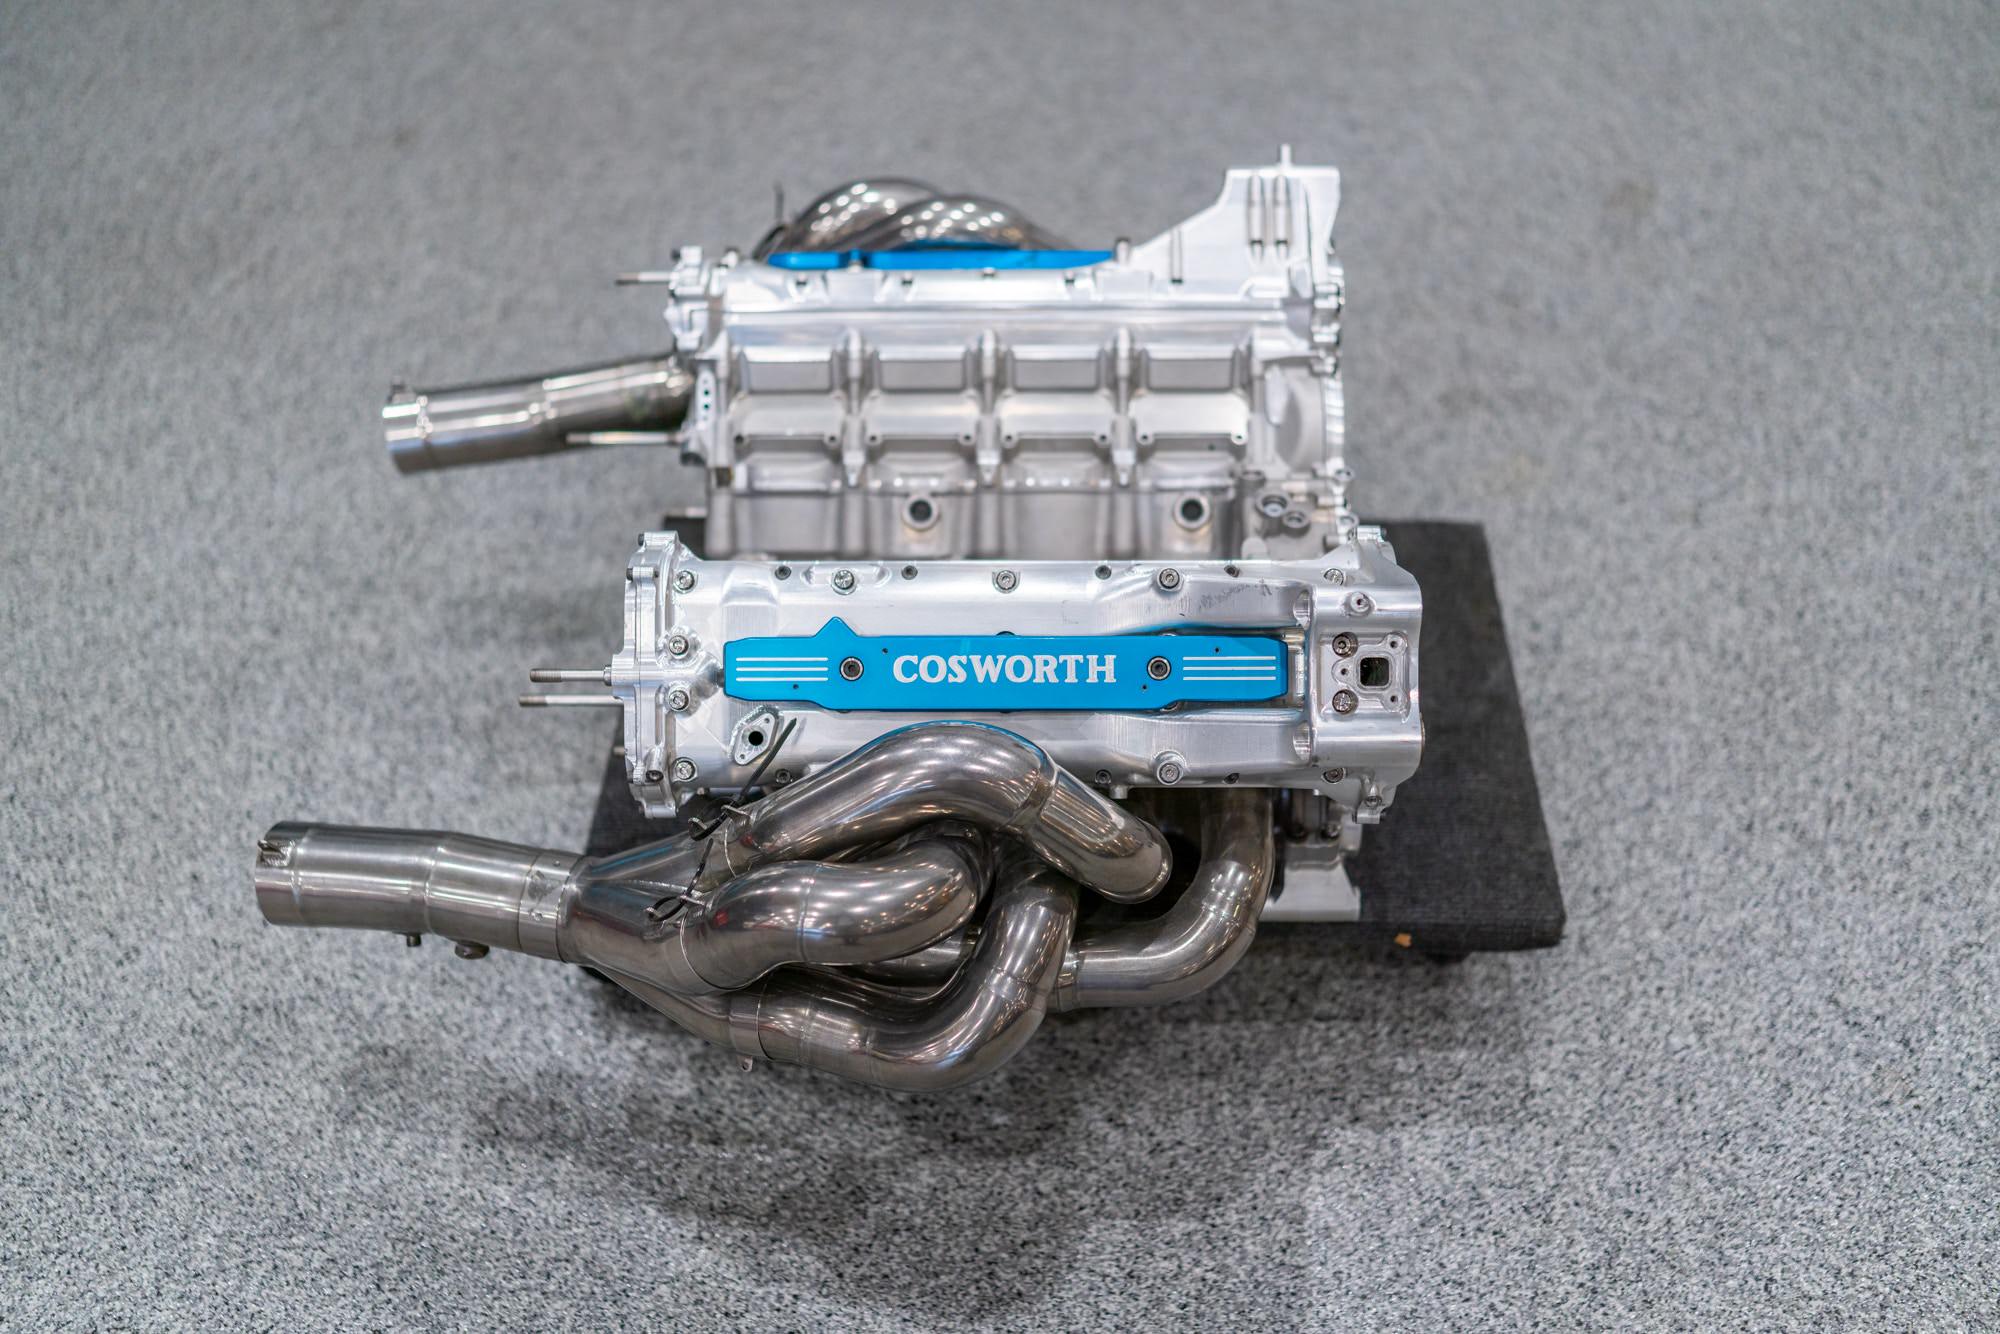 For Sale: A Cosworth CA Formula 1 Engine 915 BHP At 20,000 RPM